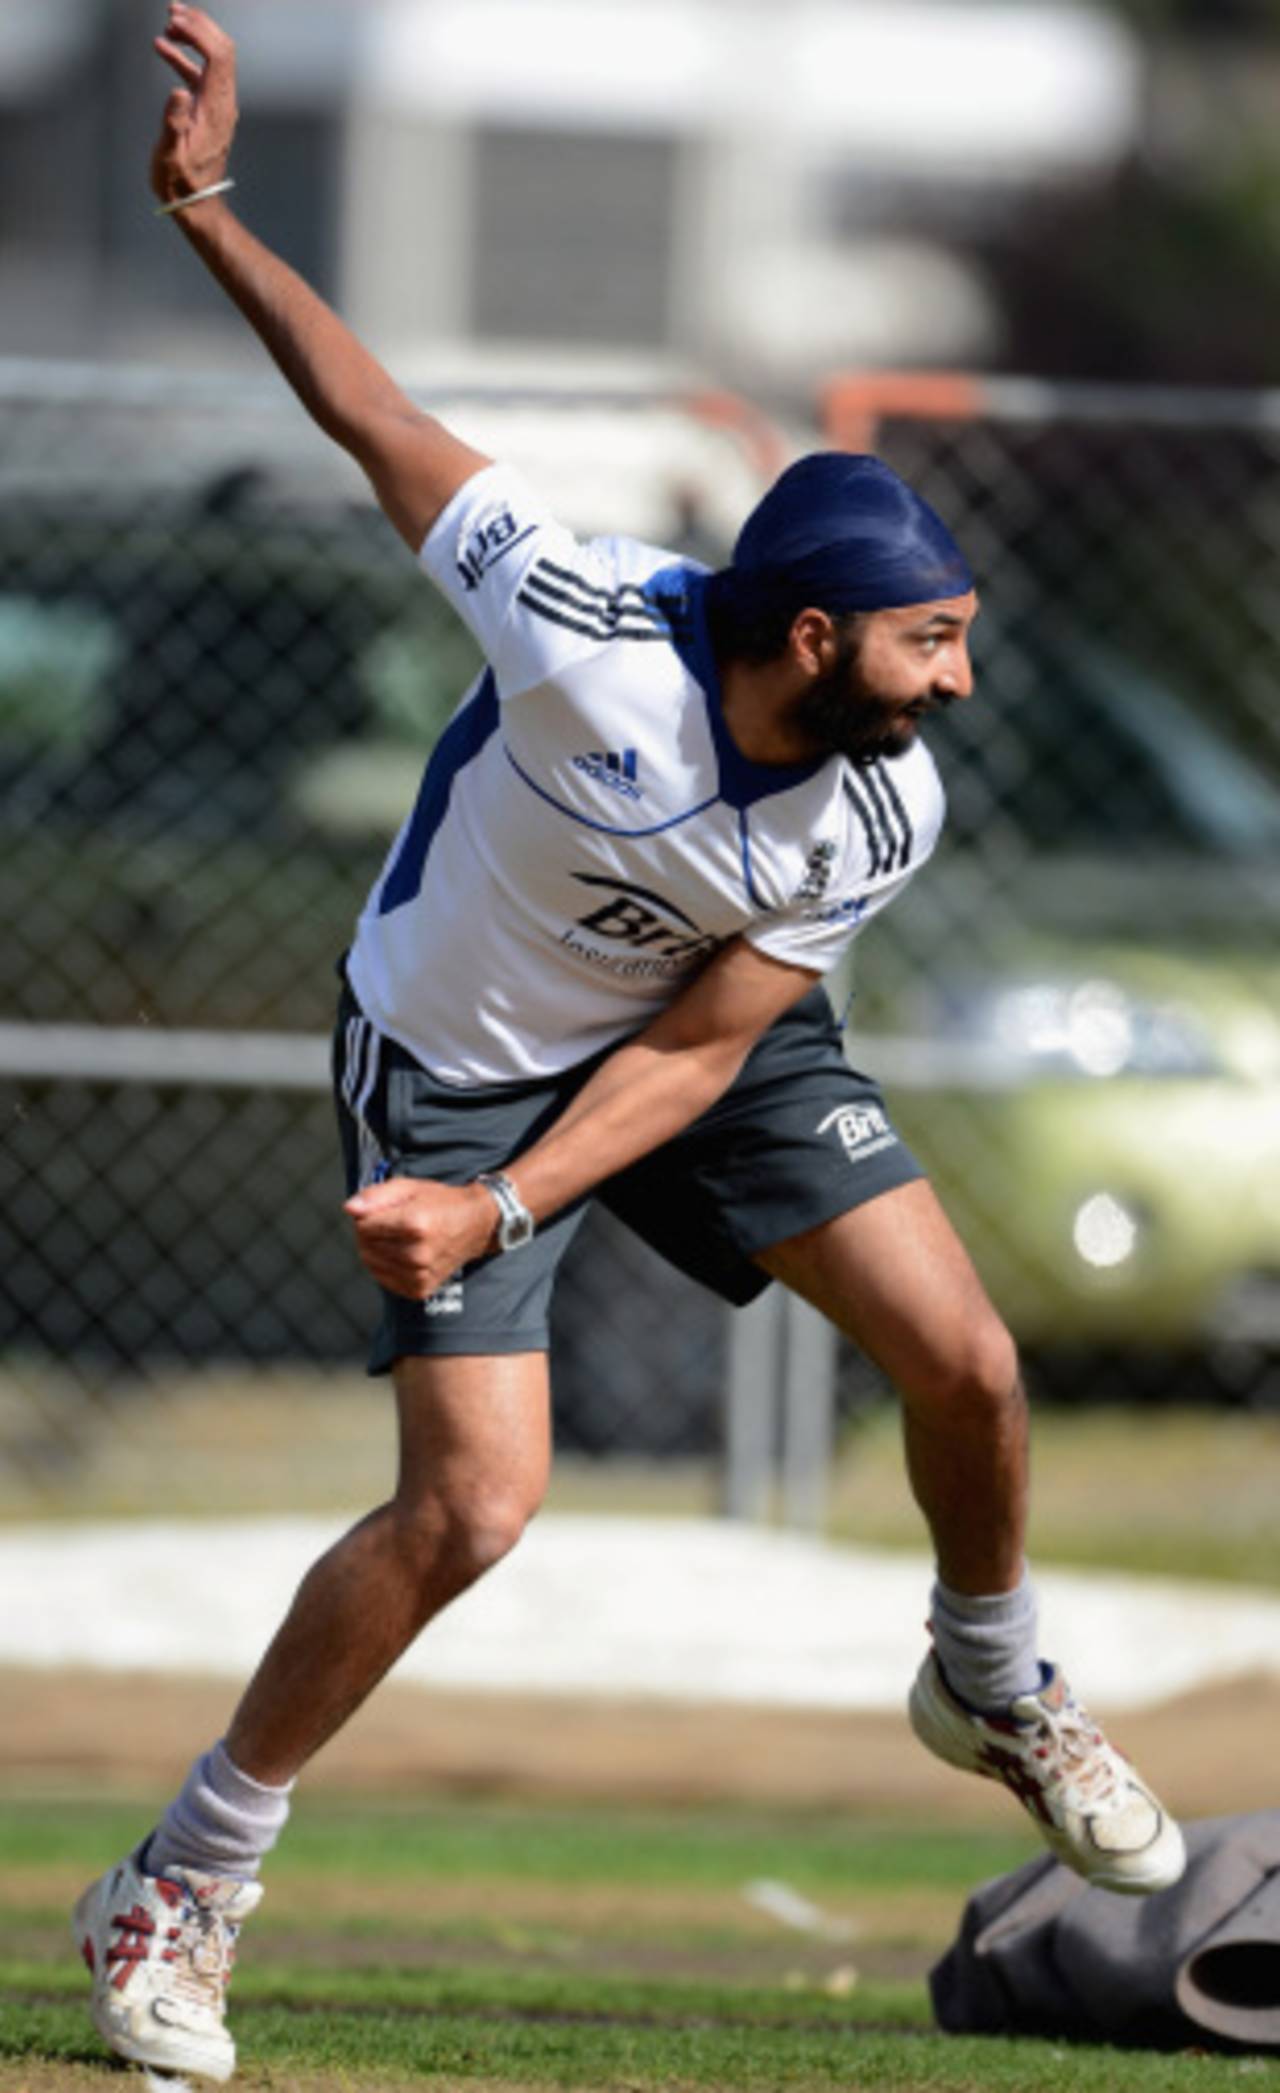 Monty Panesar will be straight into Sussex championship action after the New Zealand tour&nbsp;&nbsp;&bull;&nbsp;&nbsp;Getty Images